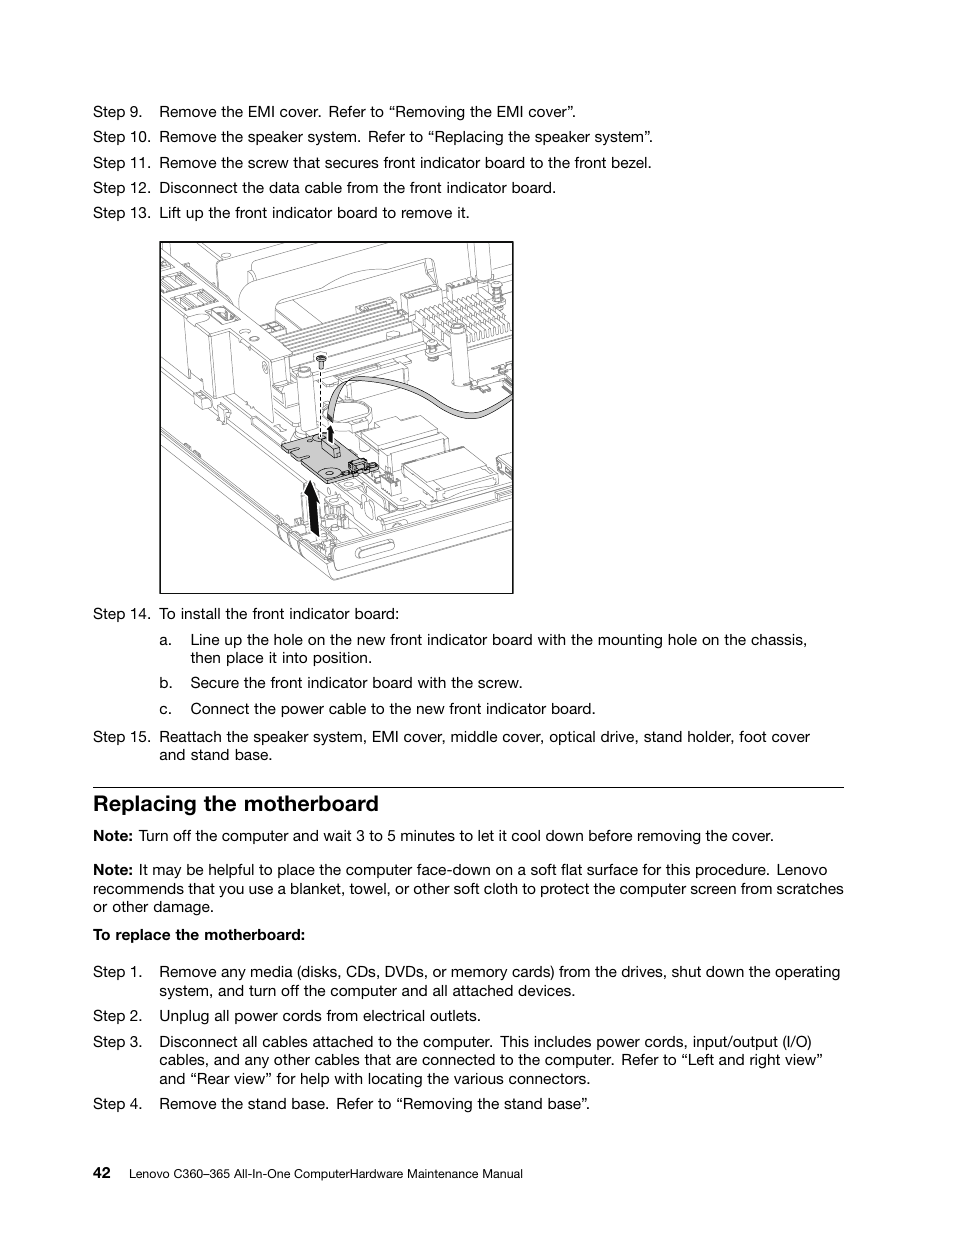 Replacing the motherboard | Lenovo C365 All-in-One User Manual | Page 48 /  61 | Original mode